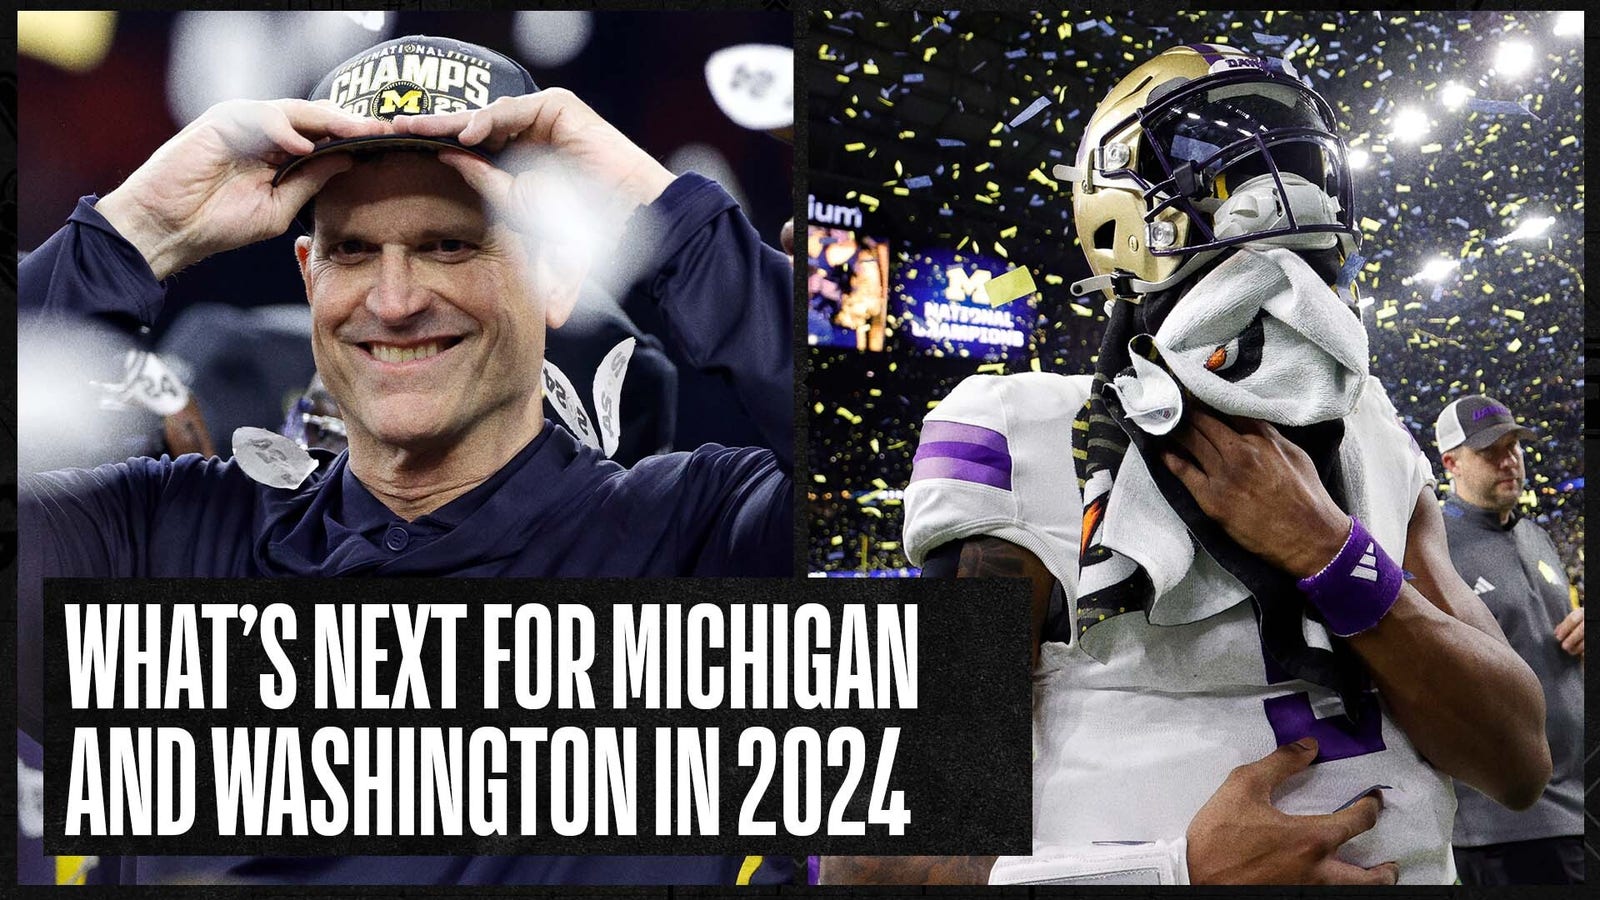 Where do Jim Harbaugh, Michigan and Washington go from here?